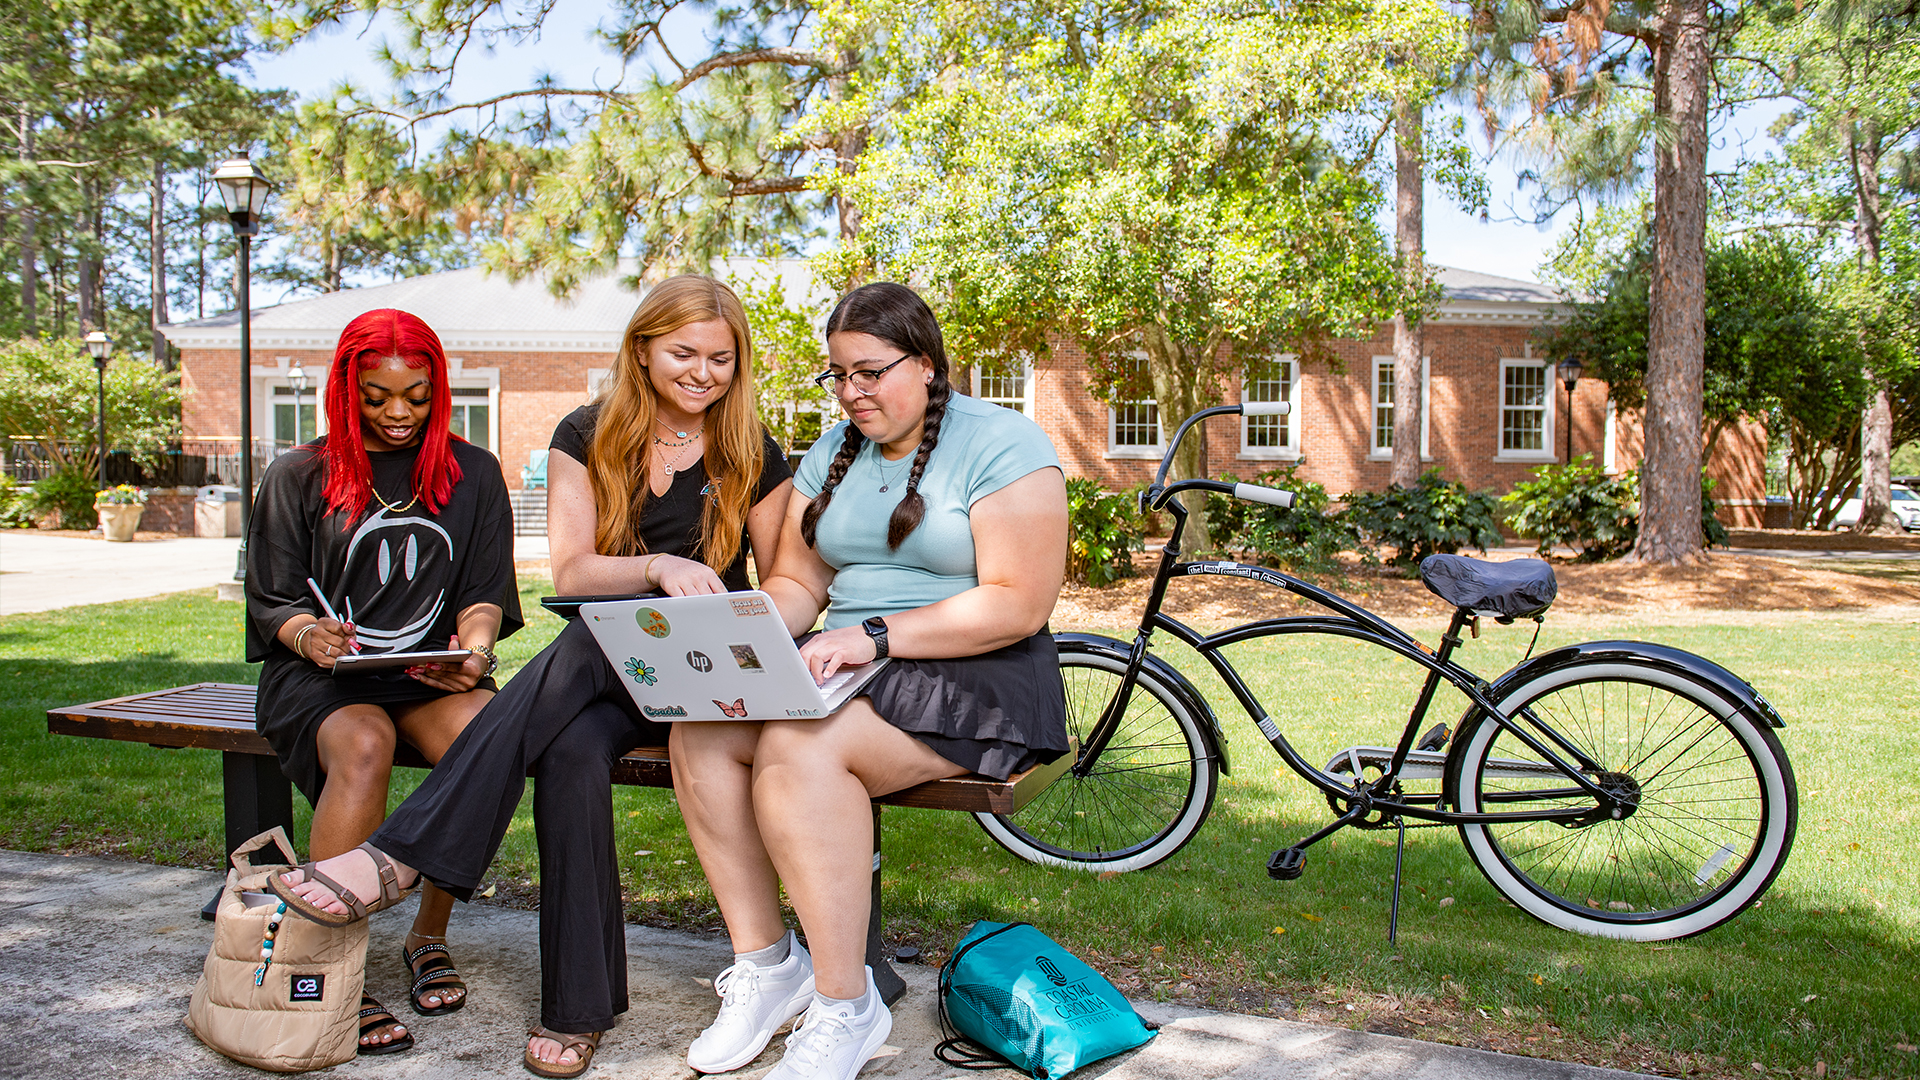 Three students sit on a bench, by a bicycle, at Blanton Park which is a central spot on campus for gathering and relaxing